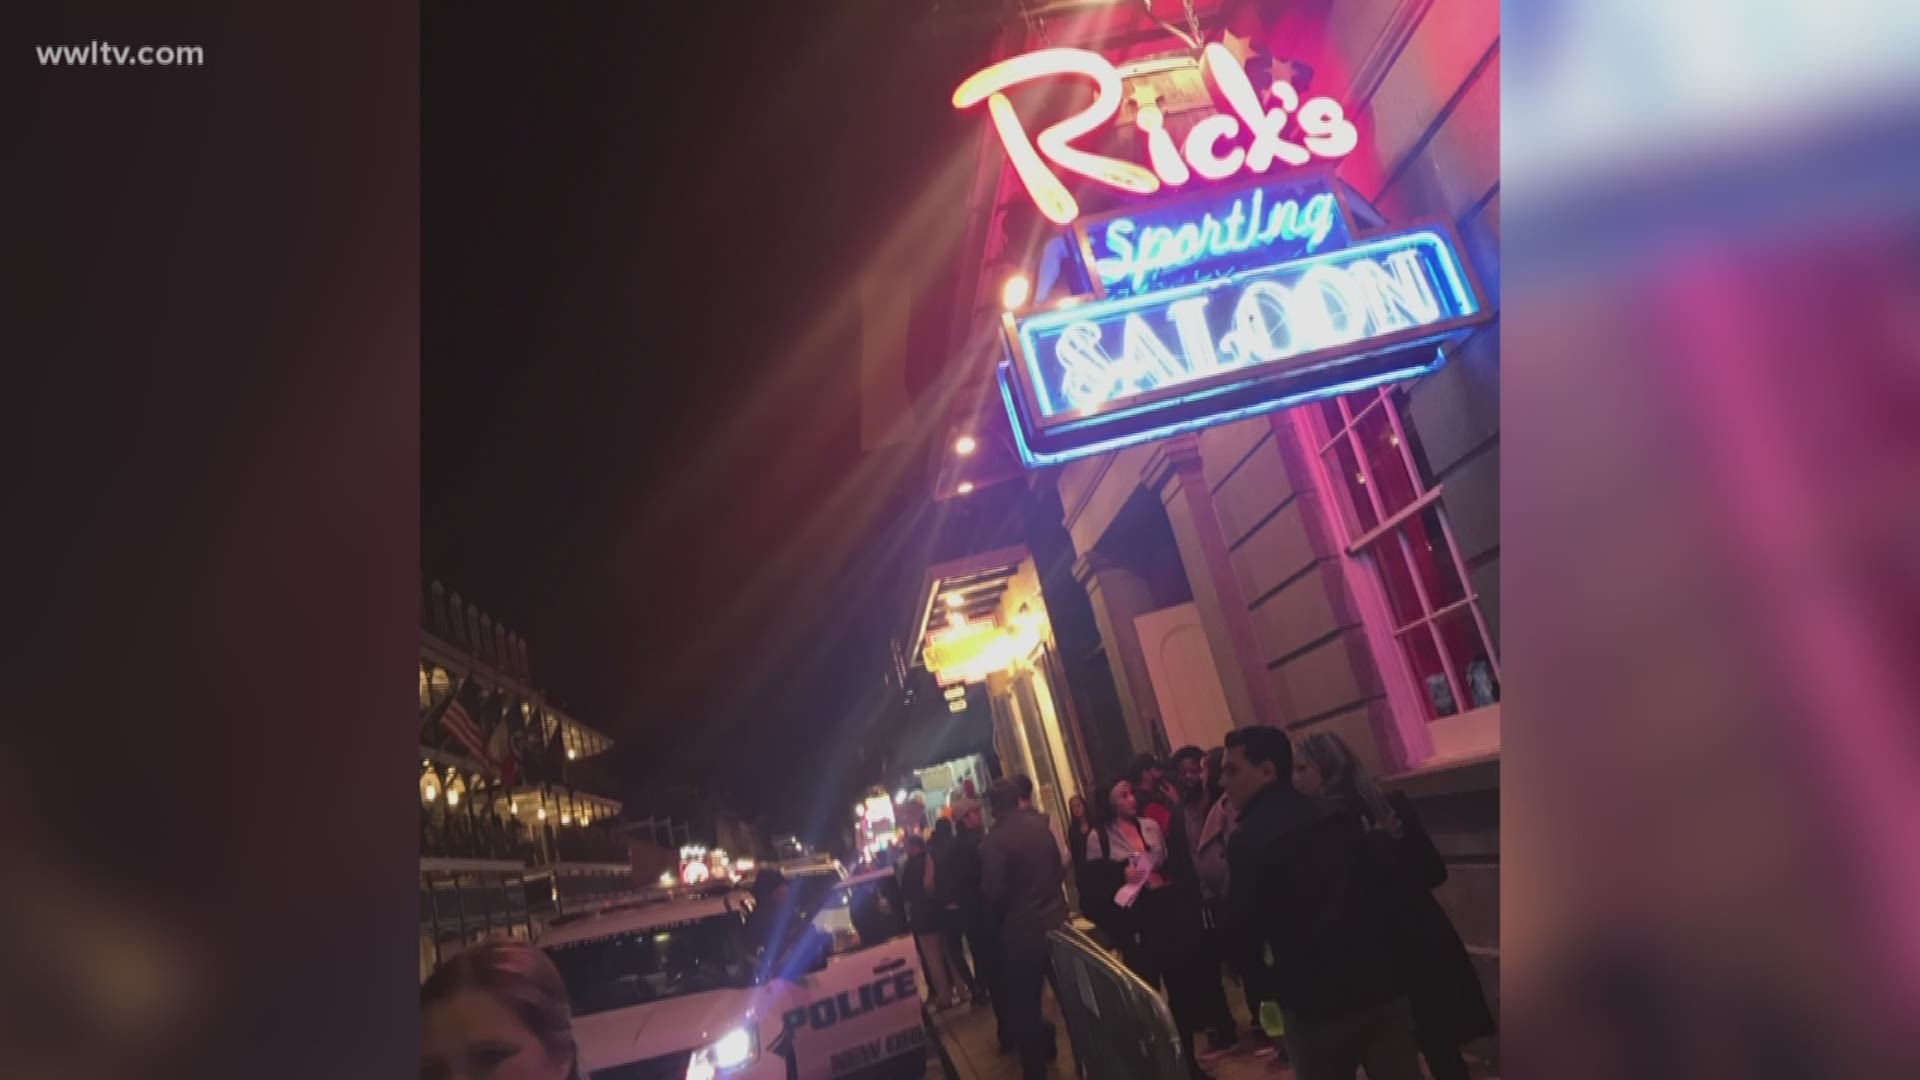 A total of eight strip clubs have been raided in New Orleans this week. Some have closed down, while others are remaining open without serving alcohol.